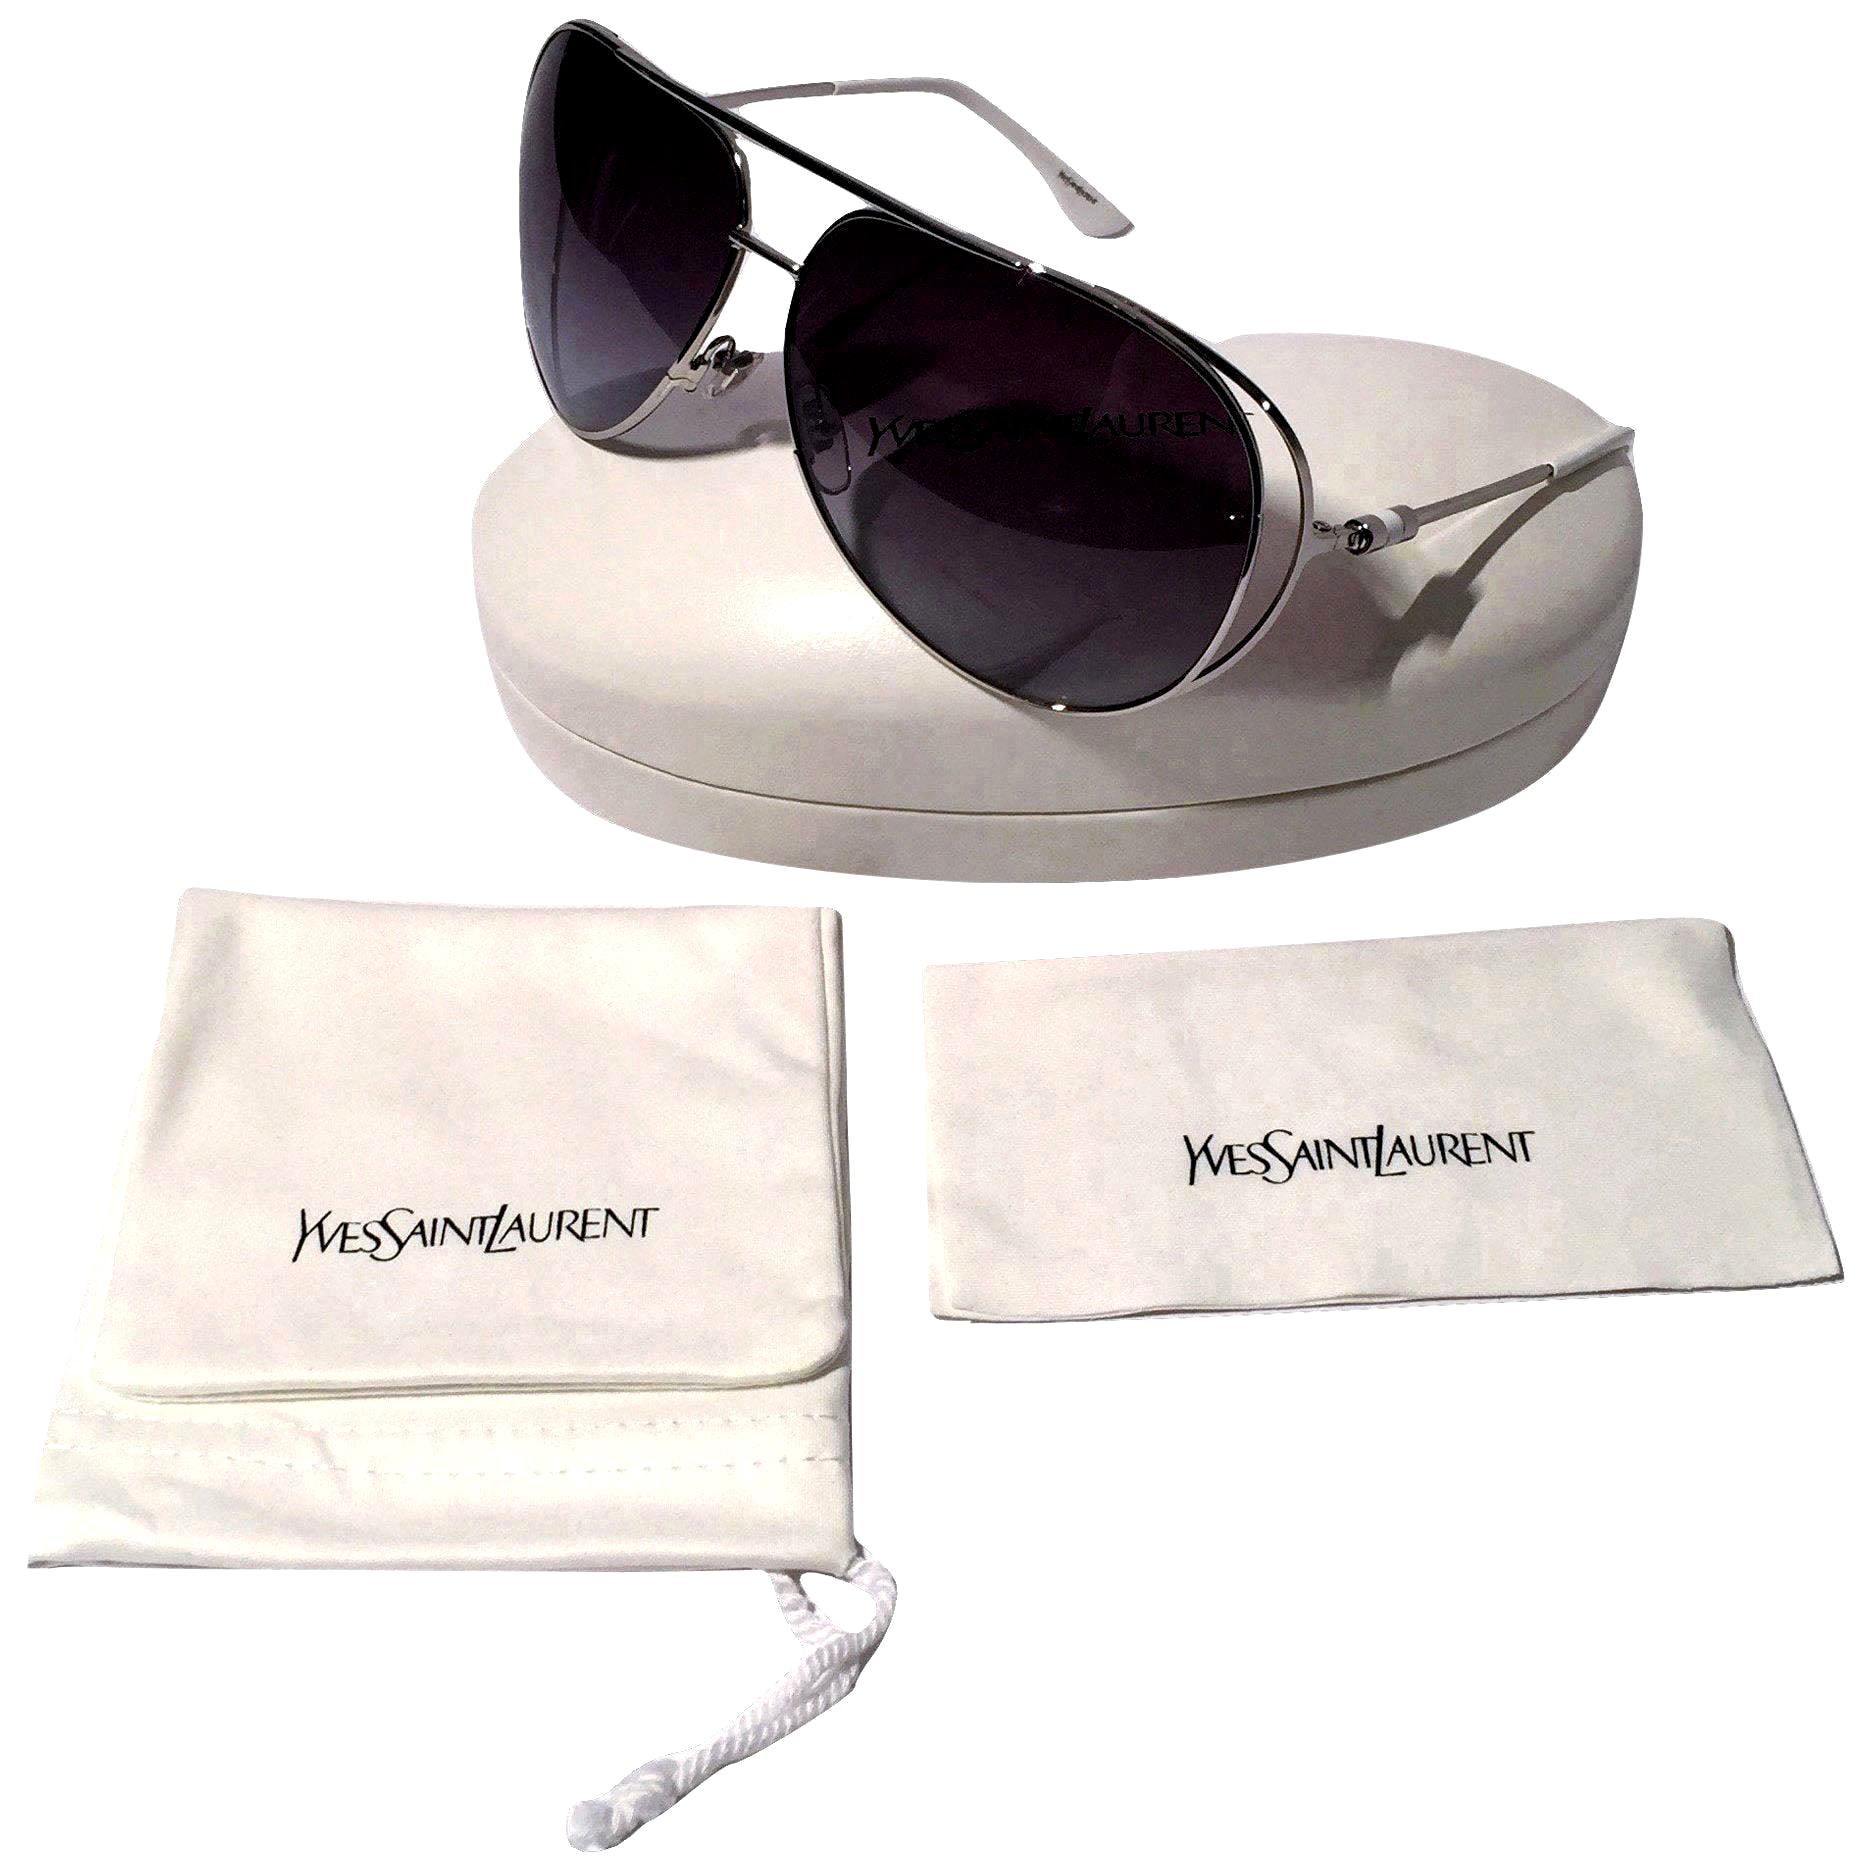  Yves Saint Laurent Sunglasses
Brand New
*Stunning in Silver Aviator
* Blue Gradient Lenses
* Super Lightweight
* White Sides
* Made in Italy
* 100% UVA/UVB Protection
* Comes with Case, Cleaning Cloth & Cloth Extra Case